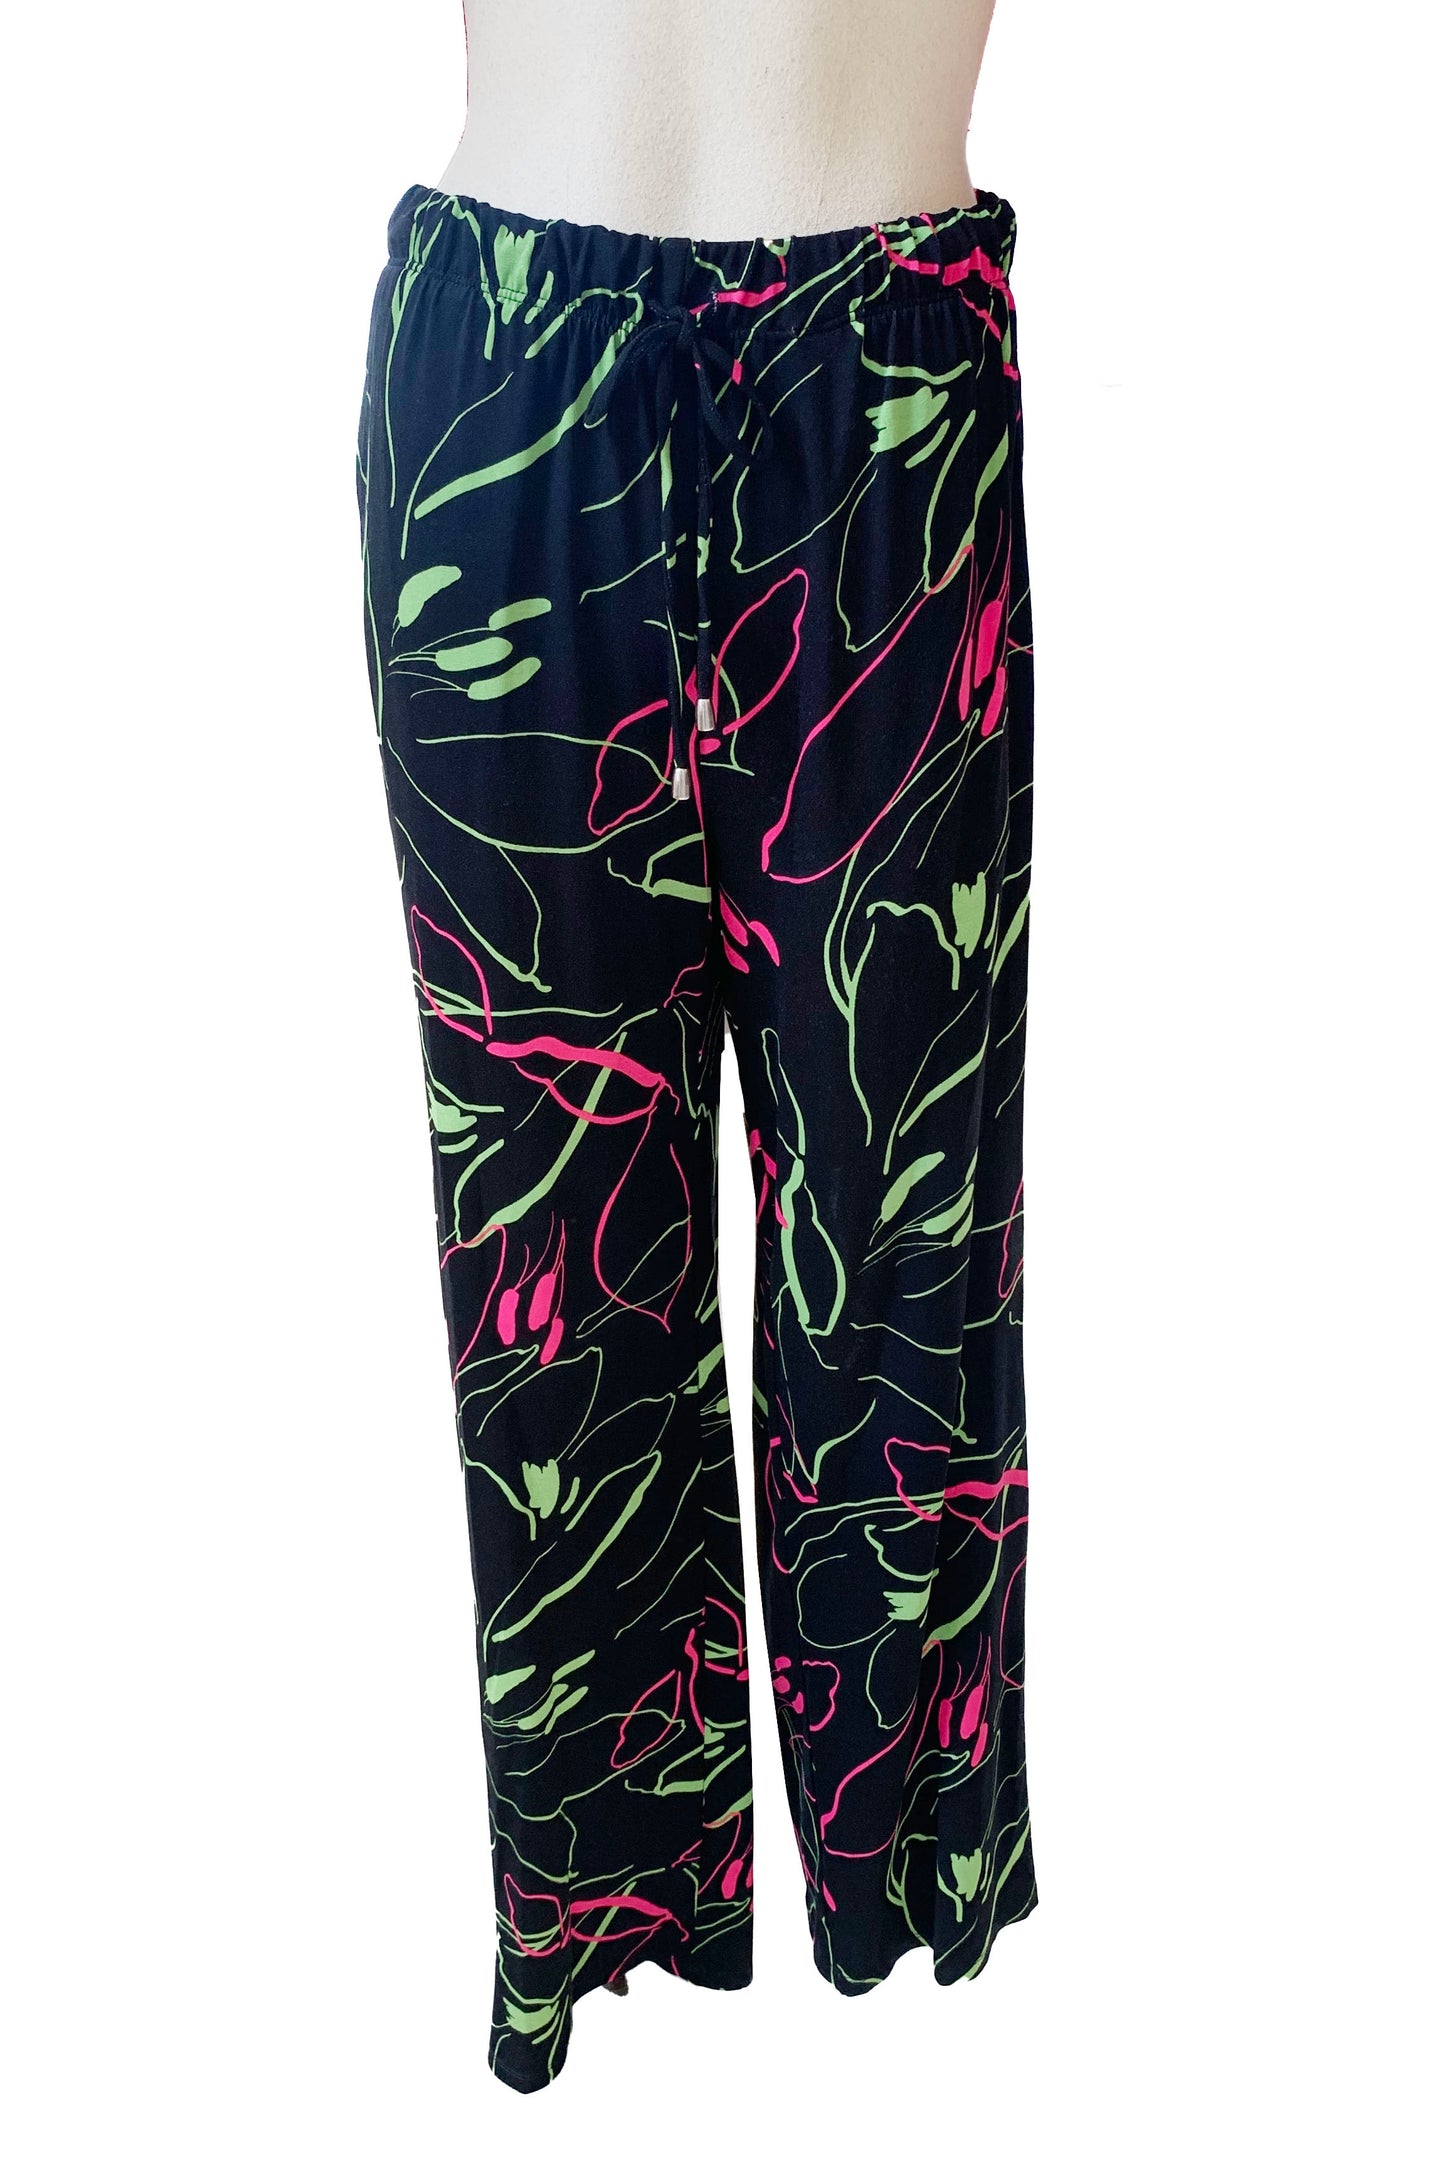 The Clarisse Pants by Pure Essence in Black/Pink/Green are shown on a mannequin in front of a white background